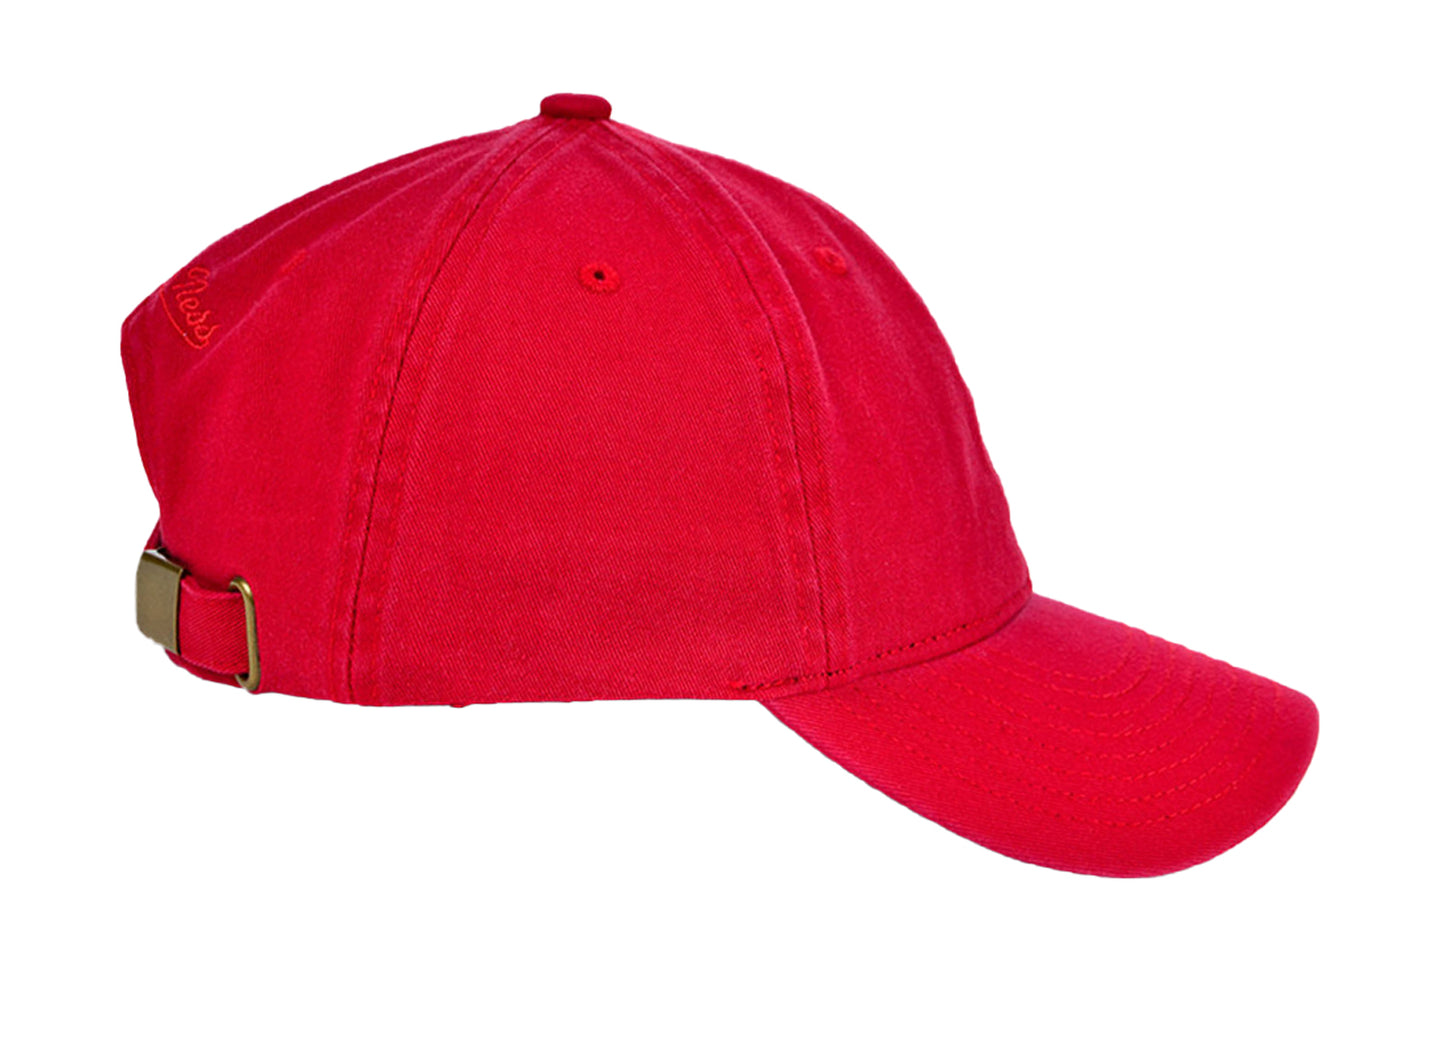 Mitchell & Ness Basic Blank Dad Hat - Red